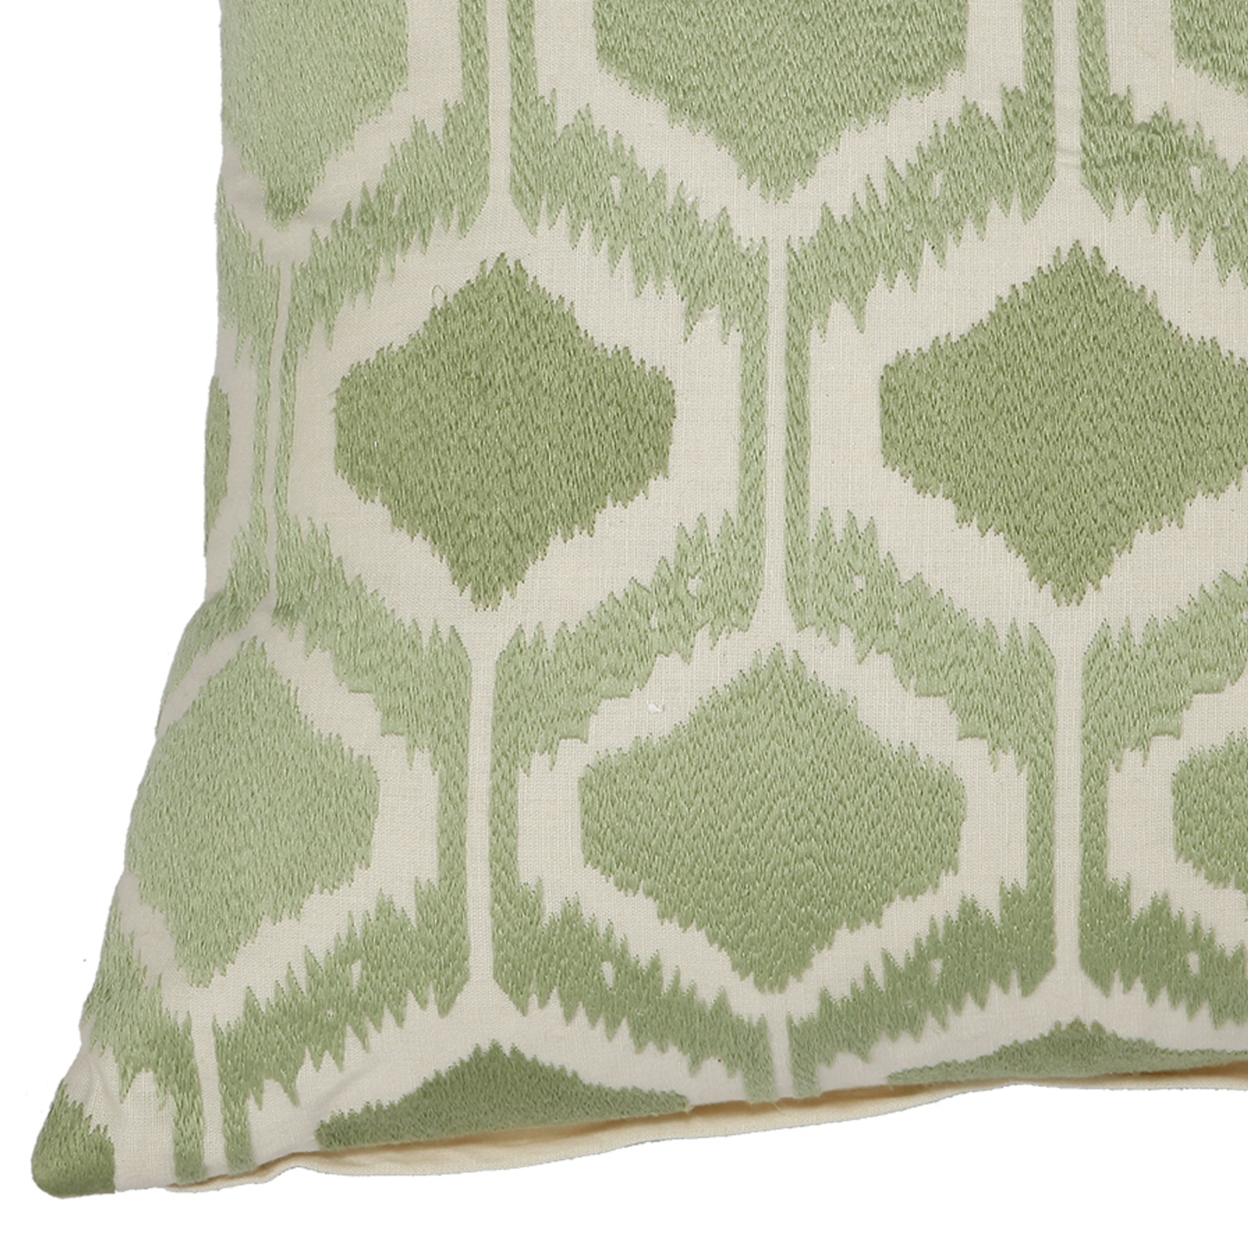 20 X 18 Inch Cotton Pillow With Fretwork Embroidery, Set Of 2, Green And White- Saltoro Sherpi